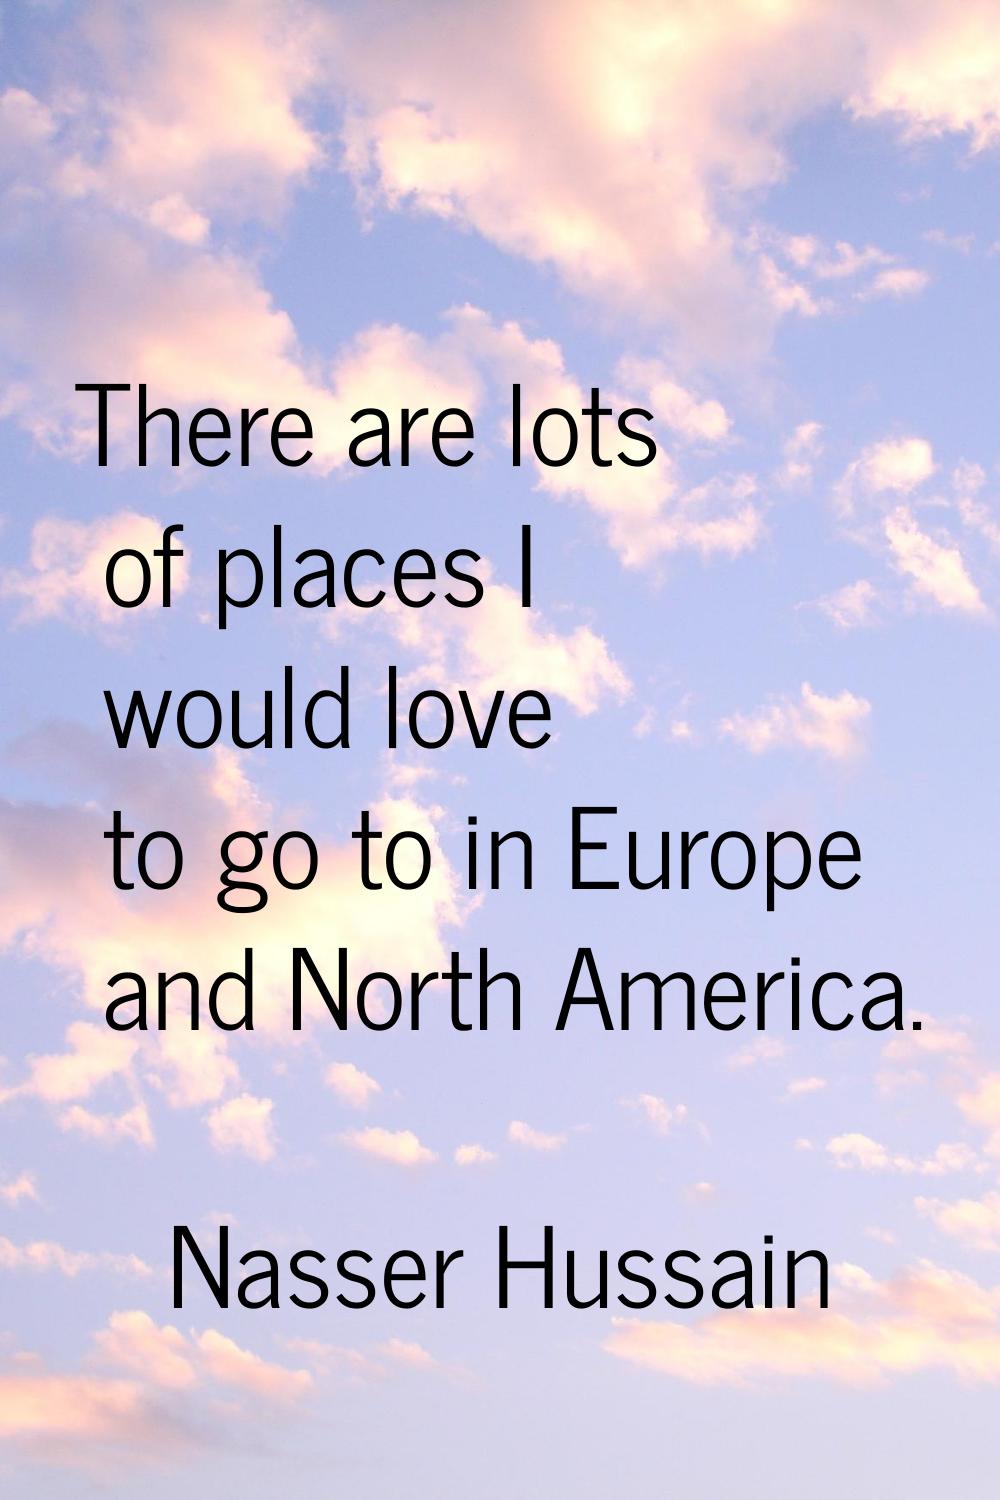 There are lots of places I would love to go to in Europe and North America.